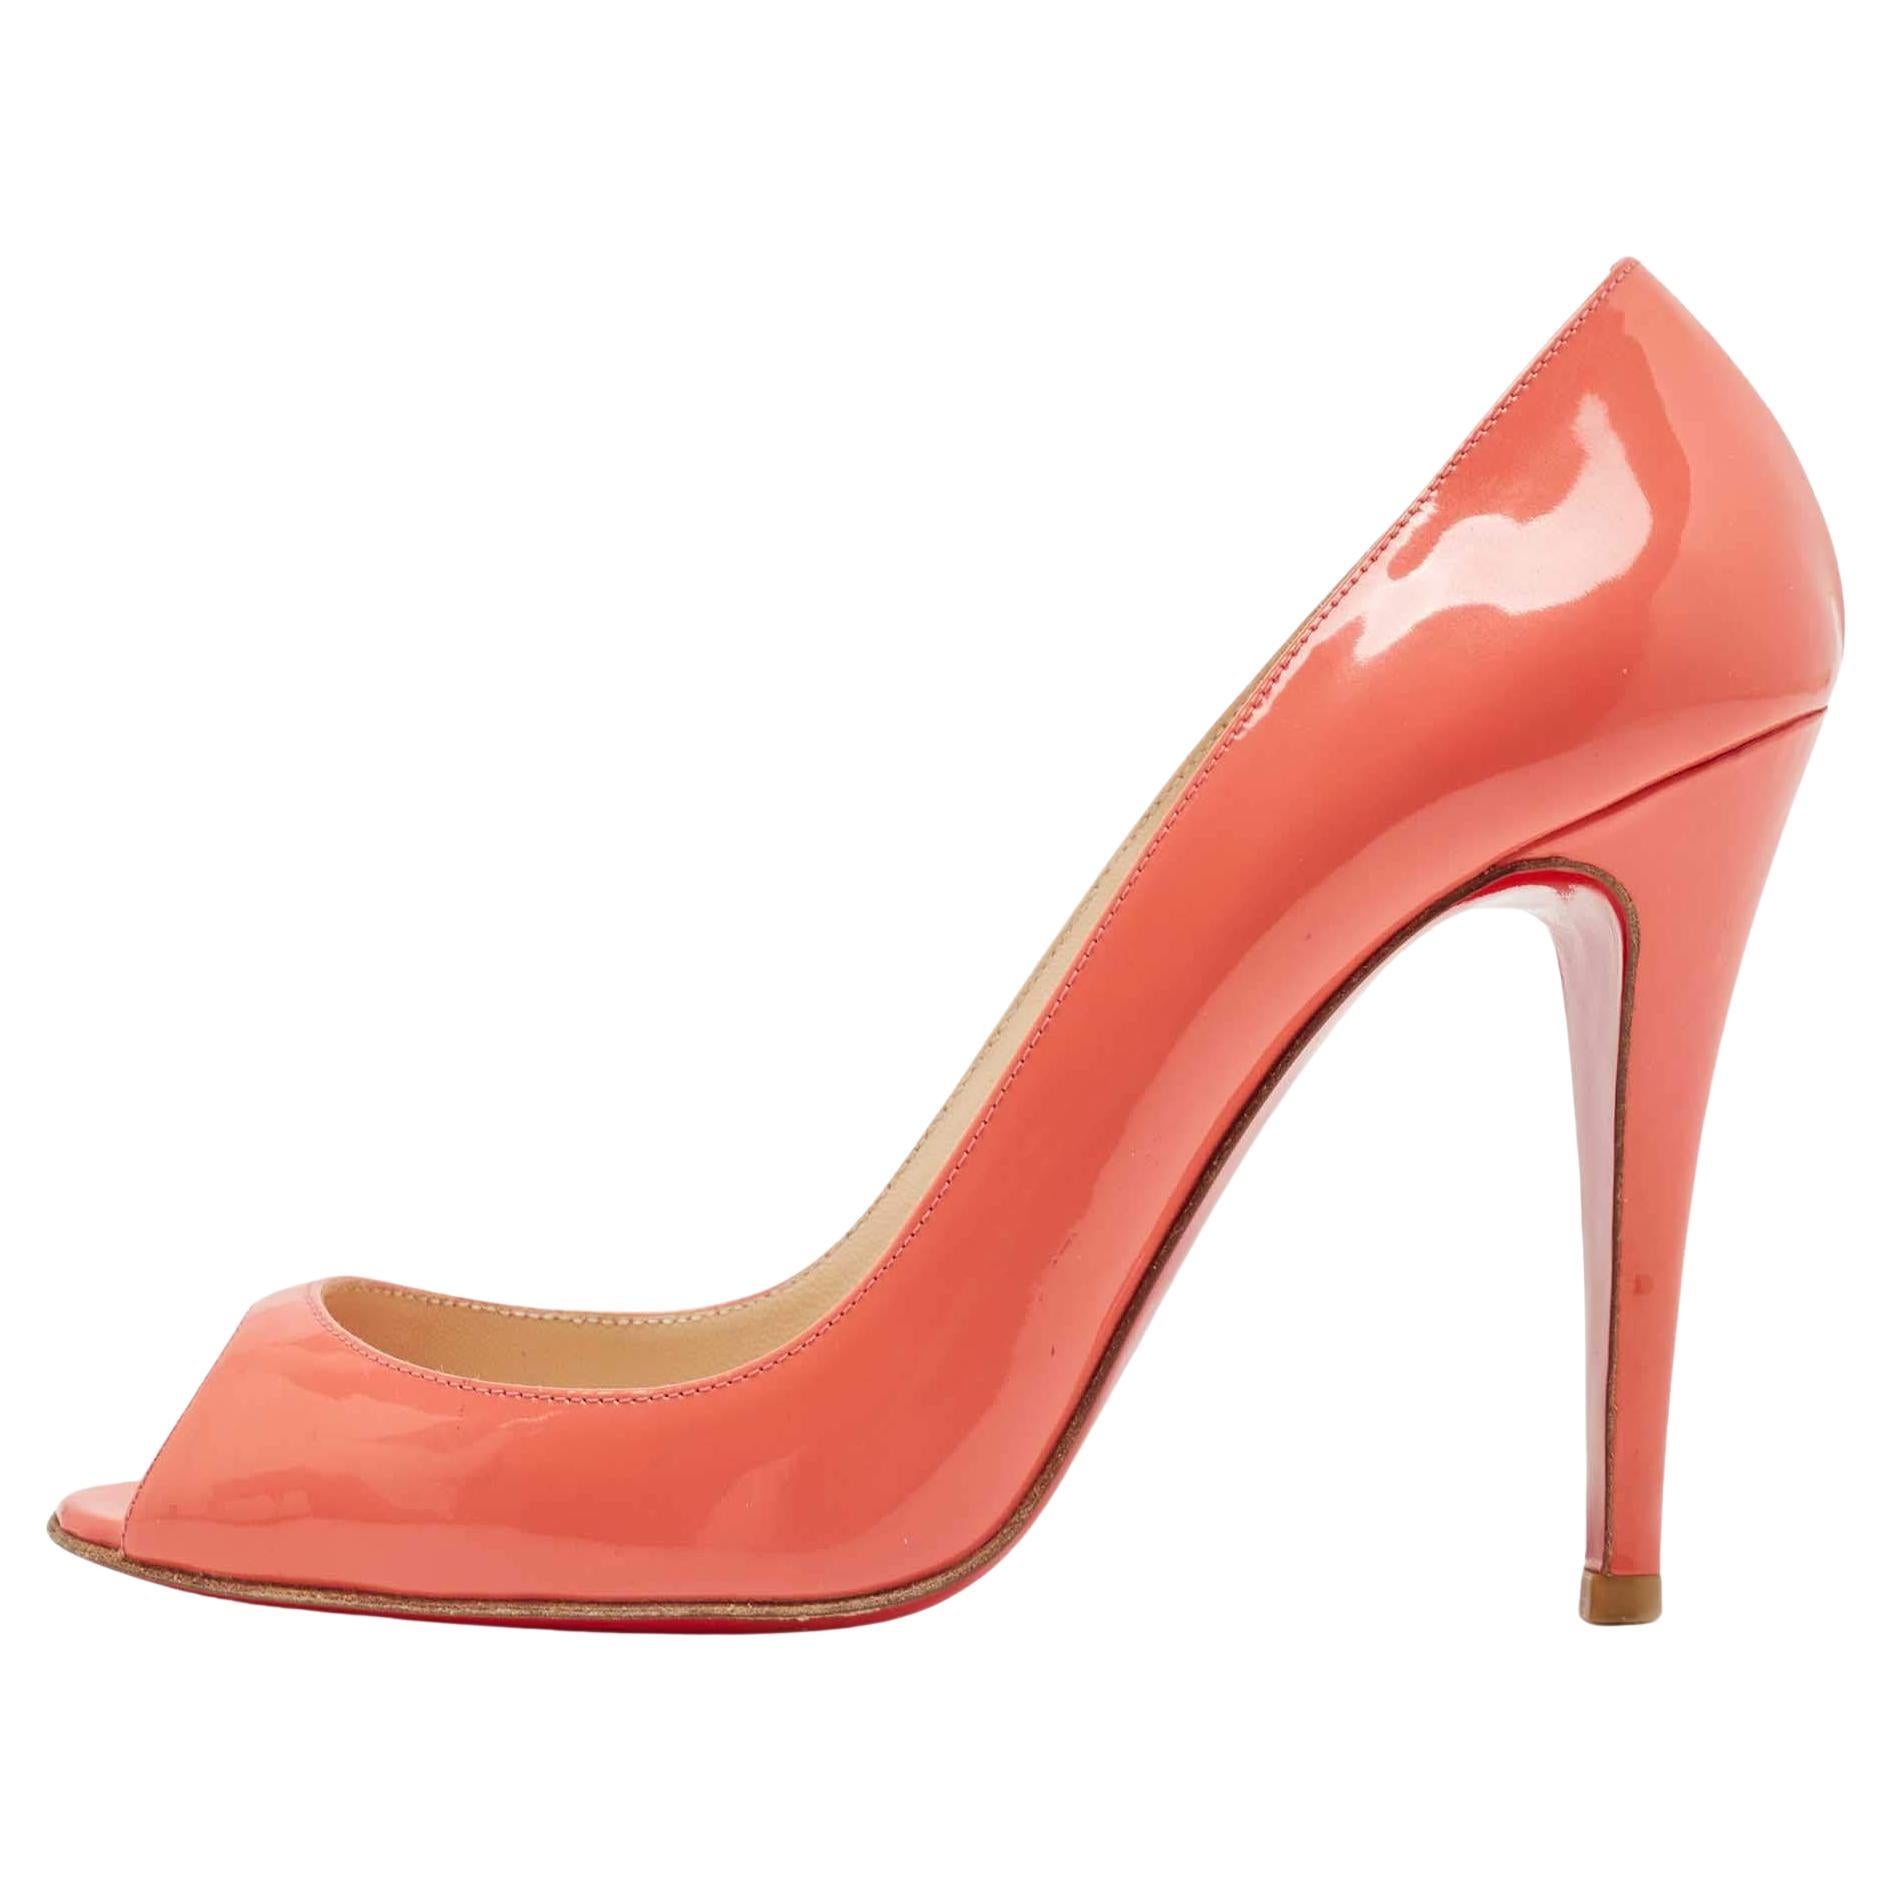 Christian Louboutin Pink Patent Leather Flo Pumps Size 37 For Sale